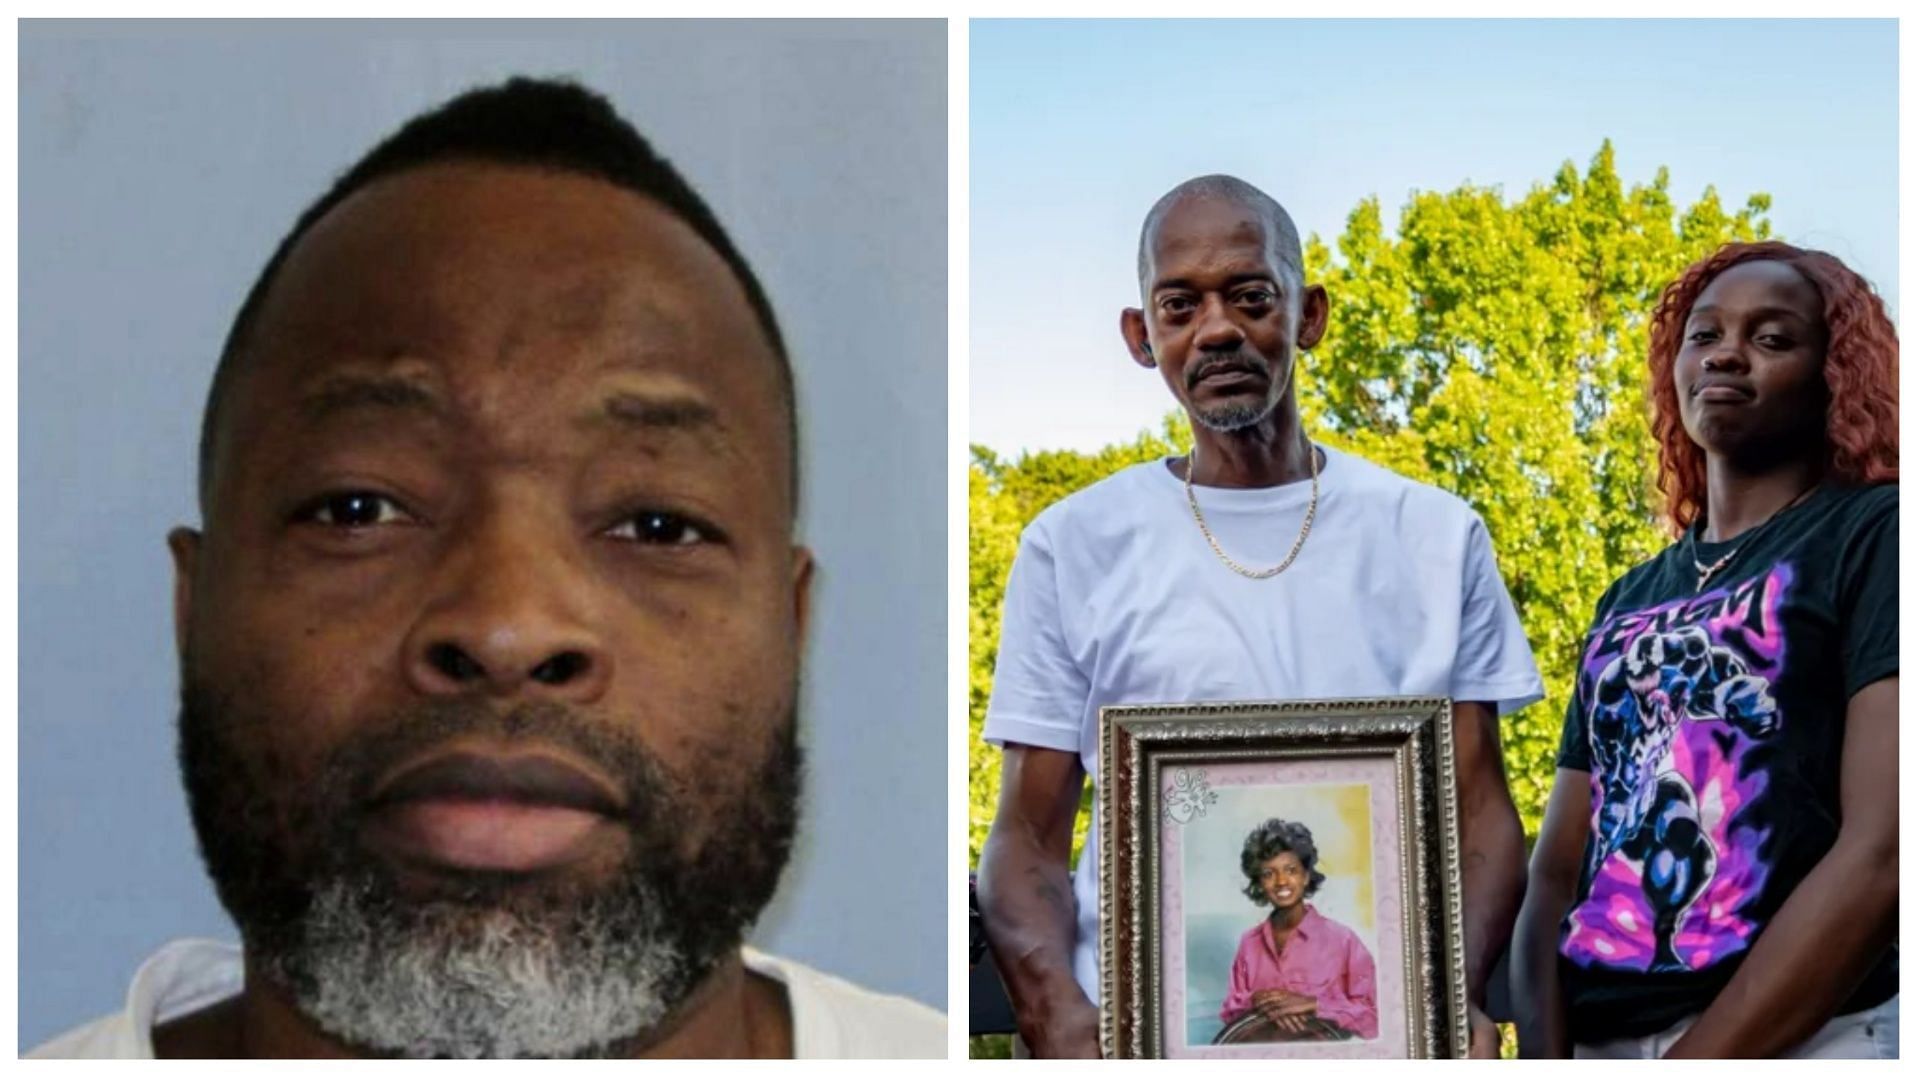 The victims&#039; family did not support the execution of Joe Nathan James Jr. (images via Birmingham police department and family)